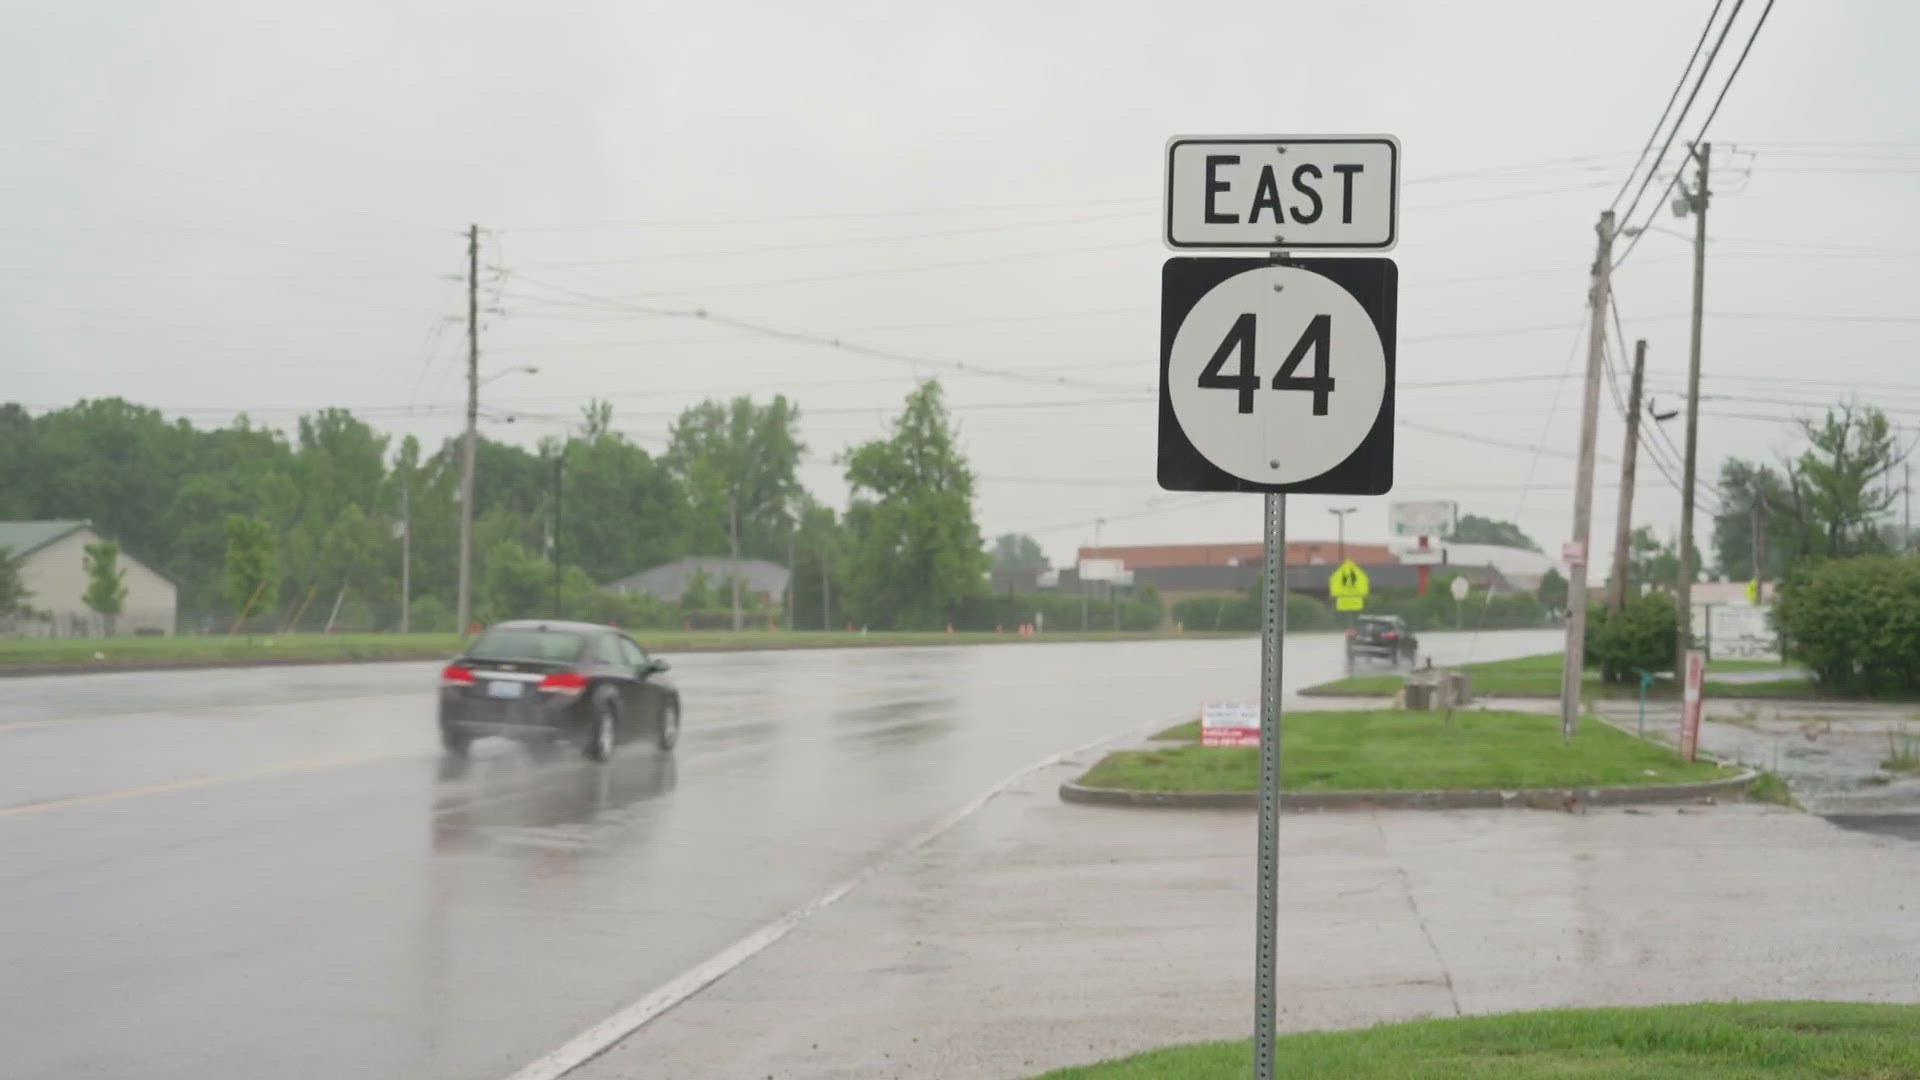 As cities like Shepherdsville and Mount Washington to continue to see growth, representatives said it's time to address their traffic issues.